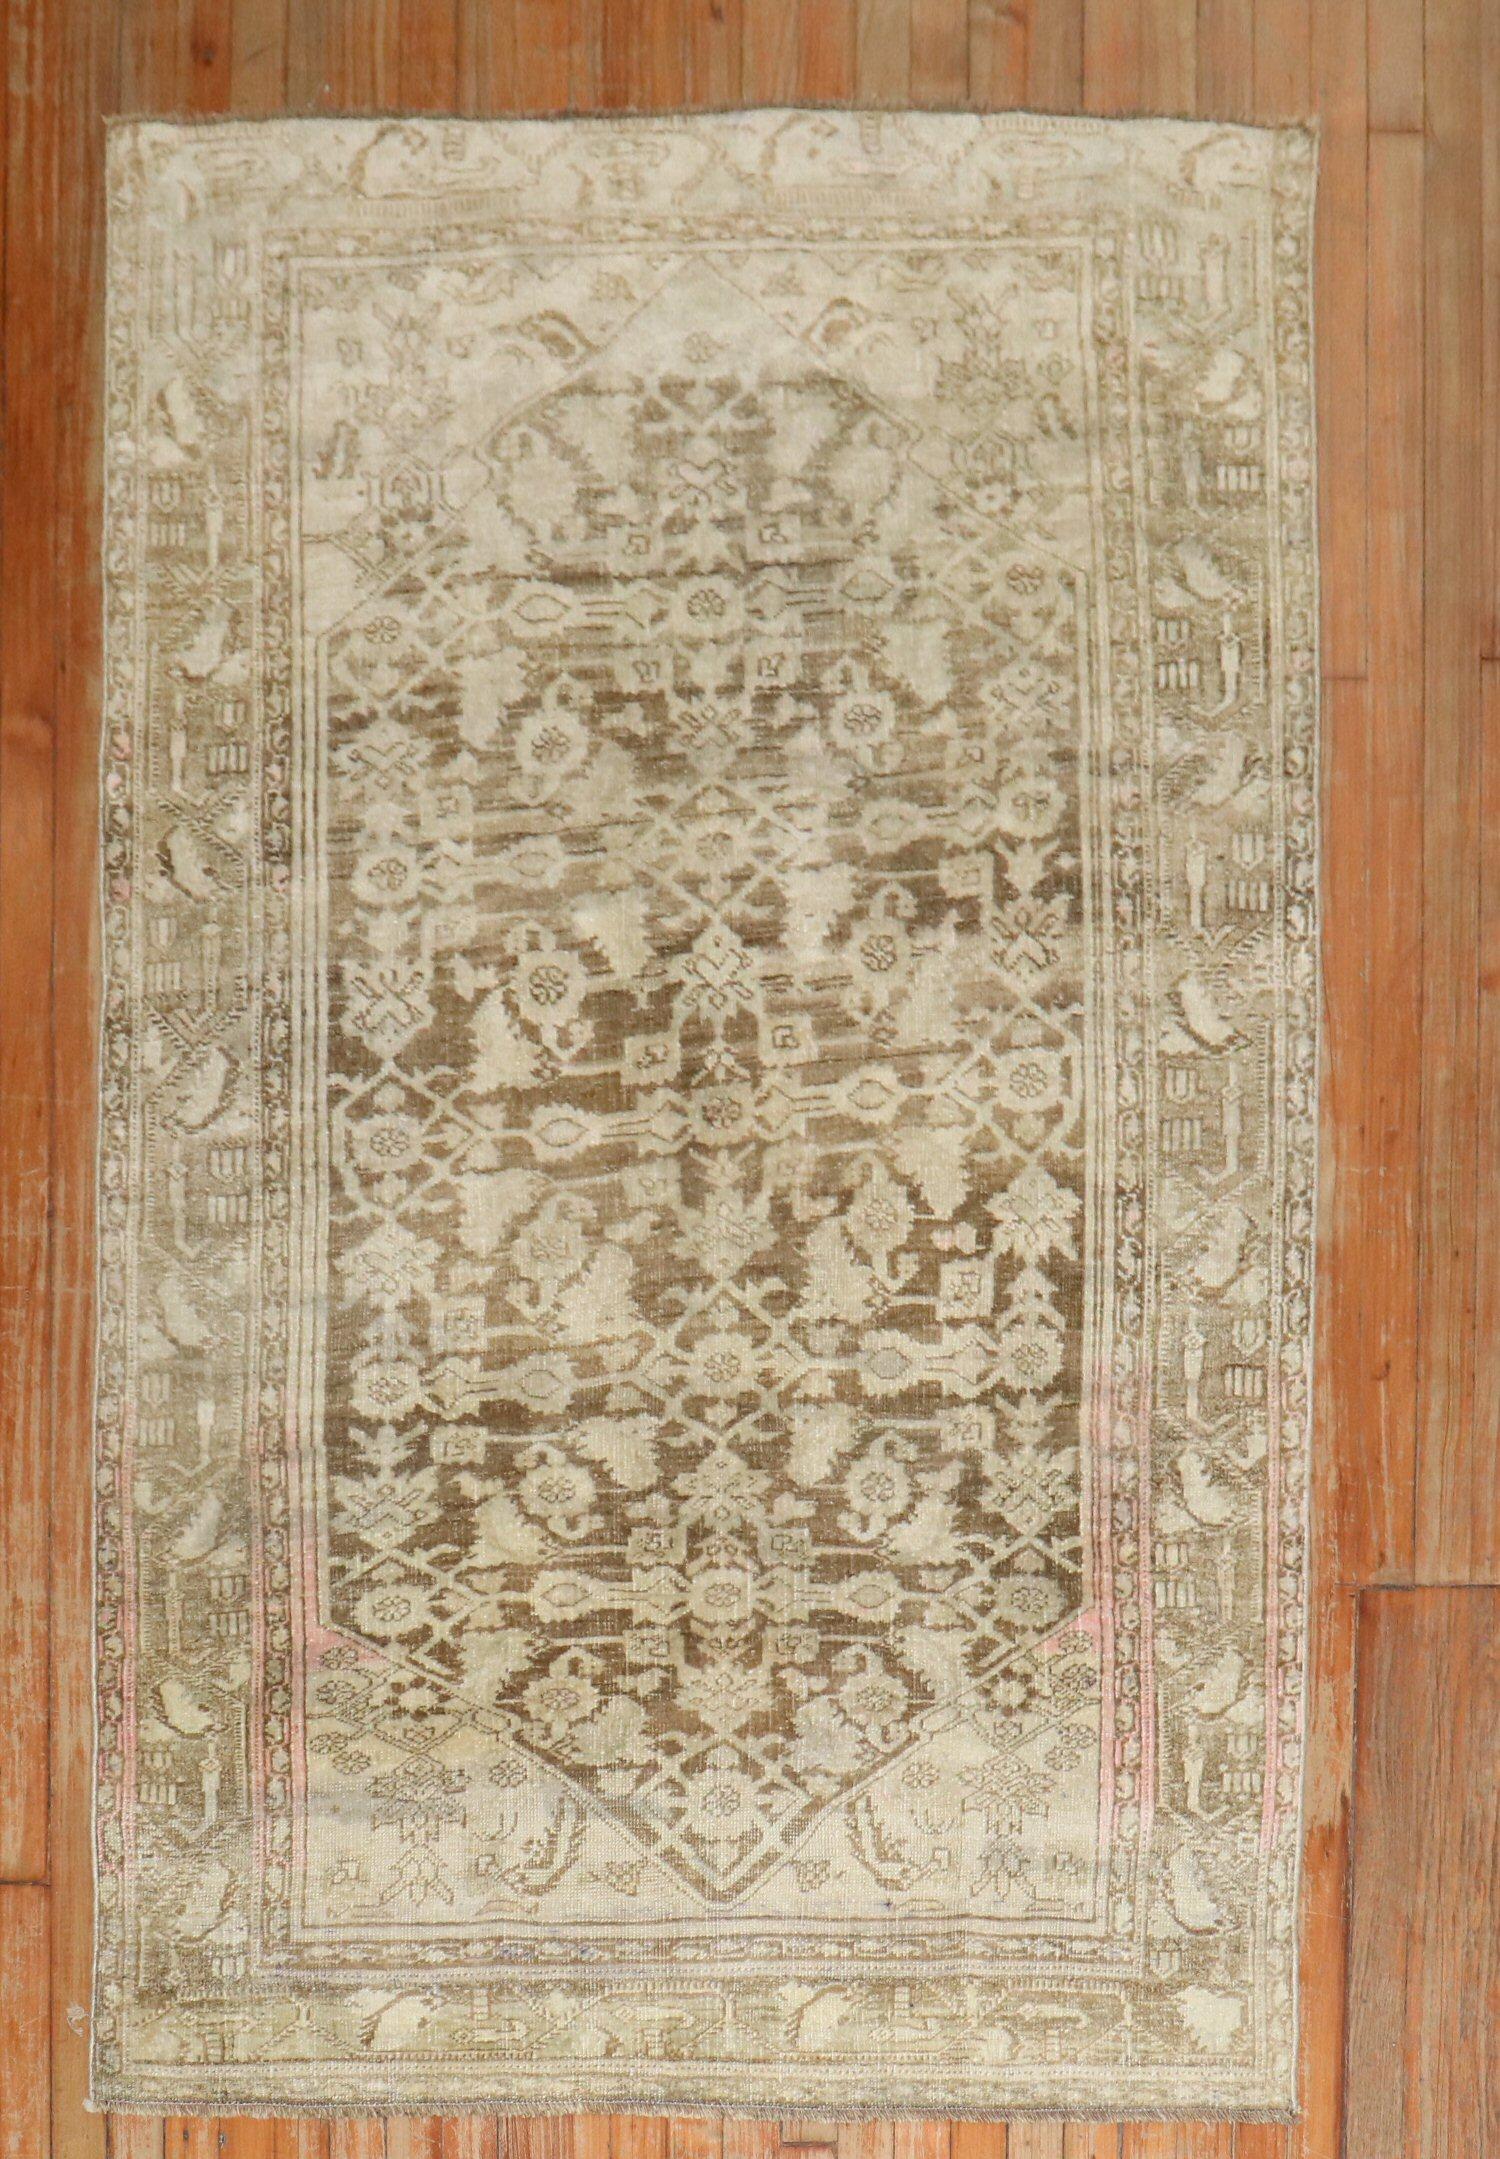 1920s Accent Size Persian bidjar in predominantly soft brown with shades of pink on 1 end of the rug.
Rug no. 31724
Size 4' 1